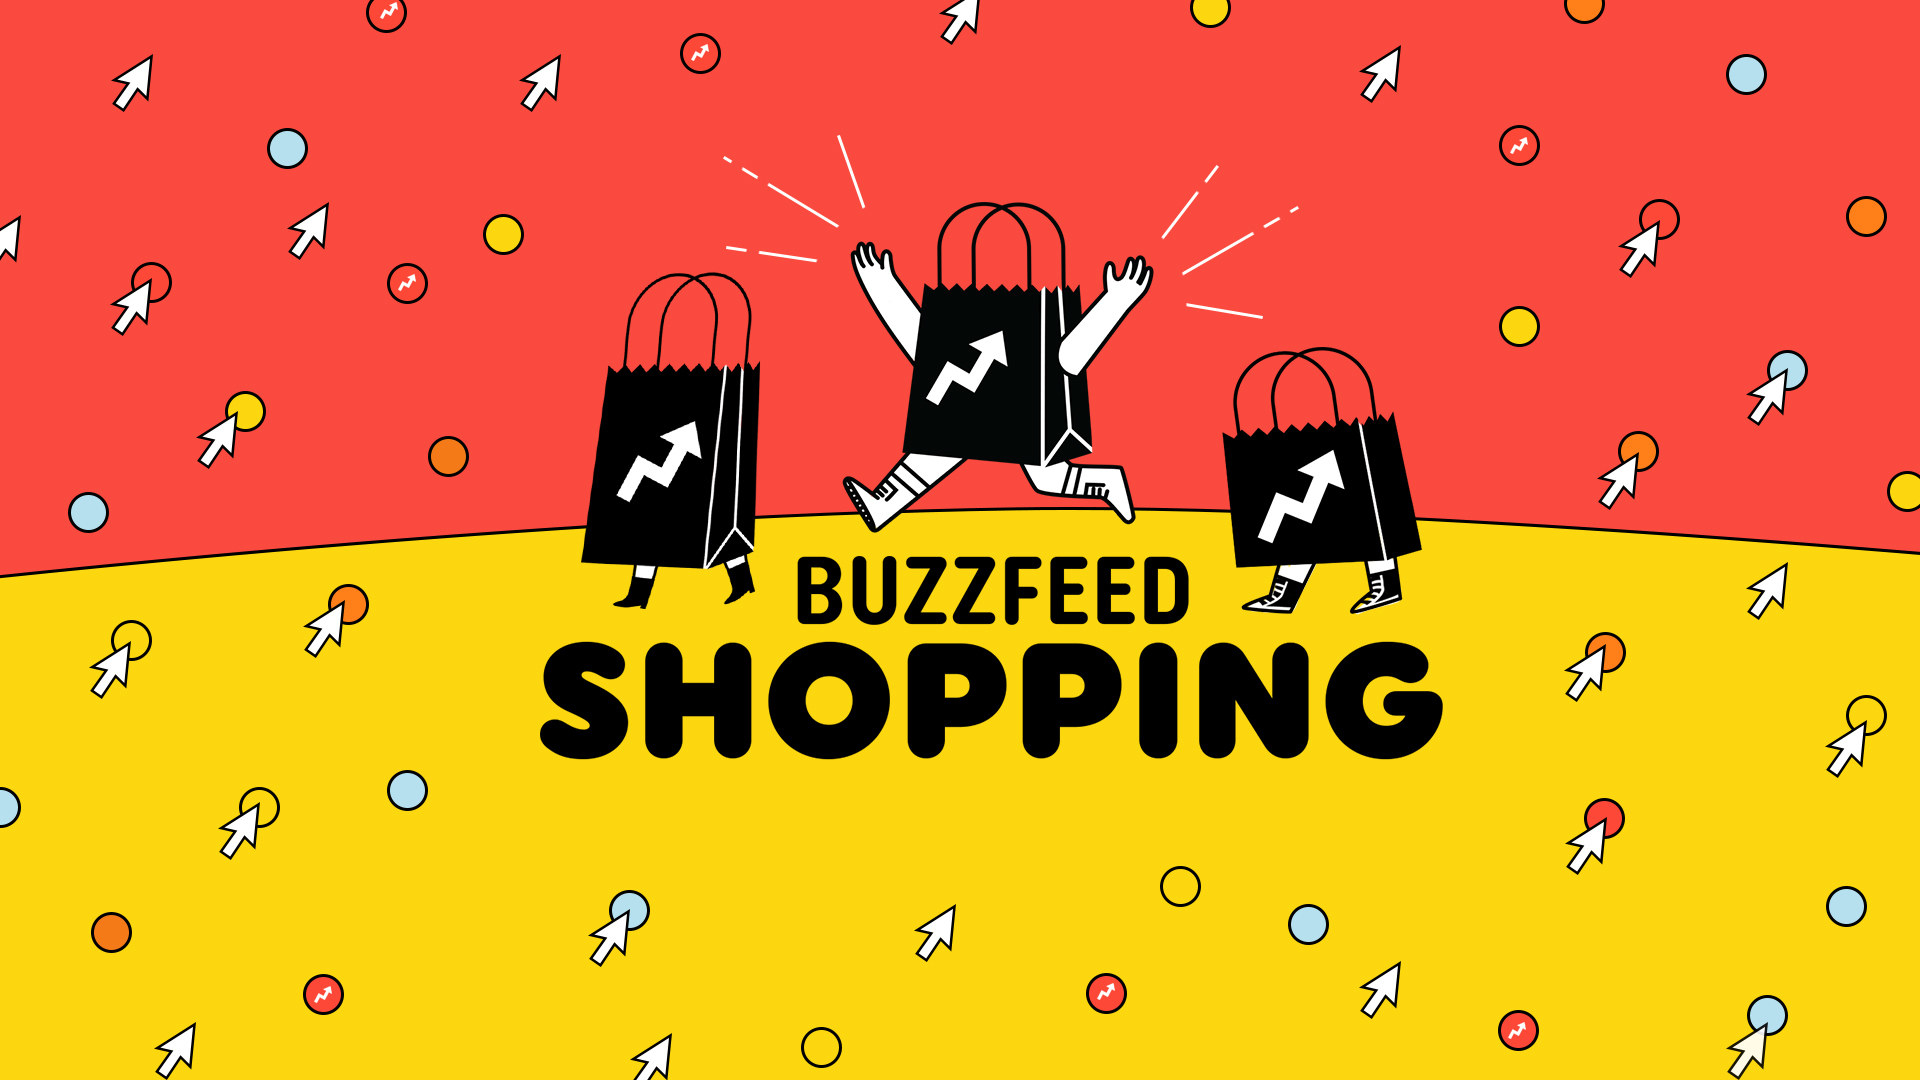 The BuzzFeed Shopping logo featuring an illustration of dancing shopping bags